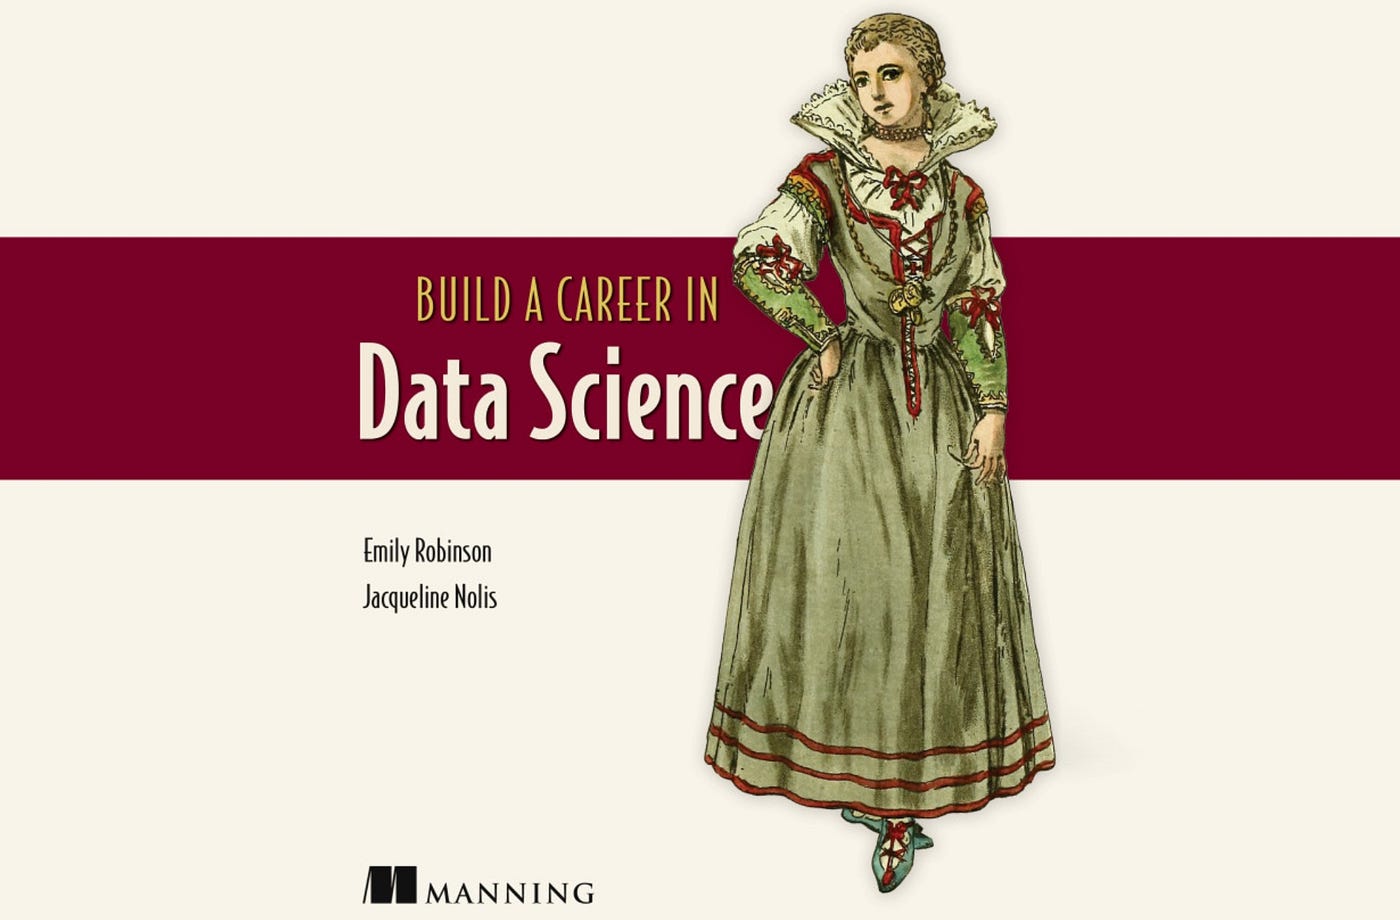 Build a Career in Data Science book cover